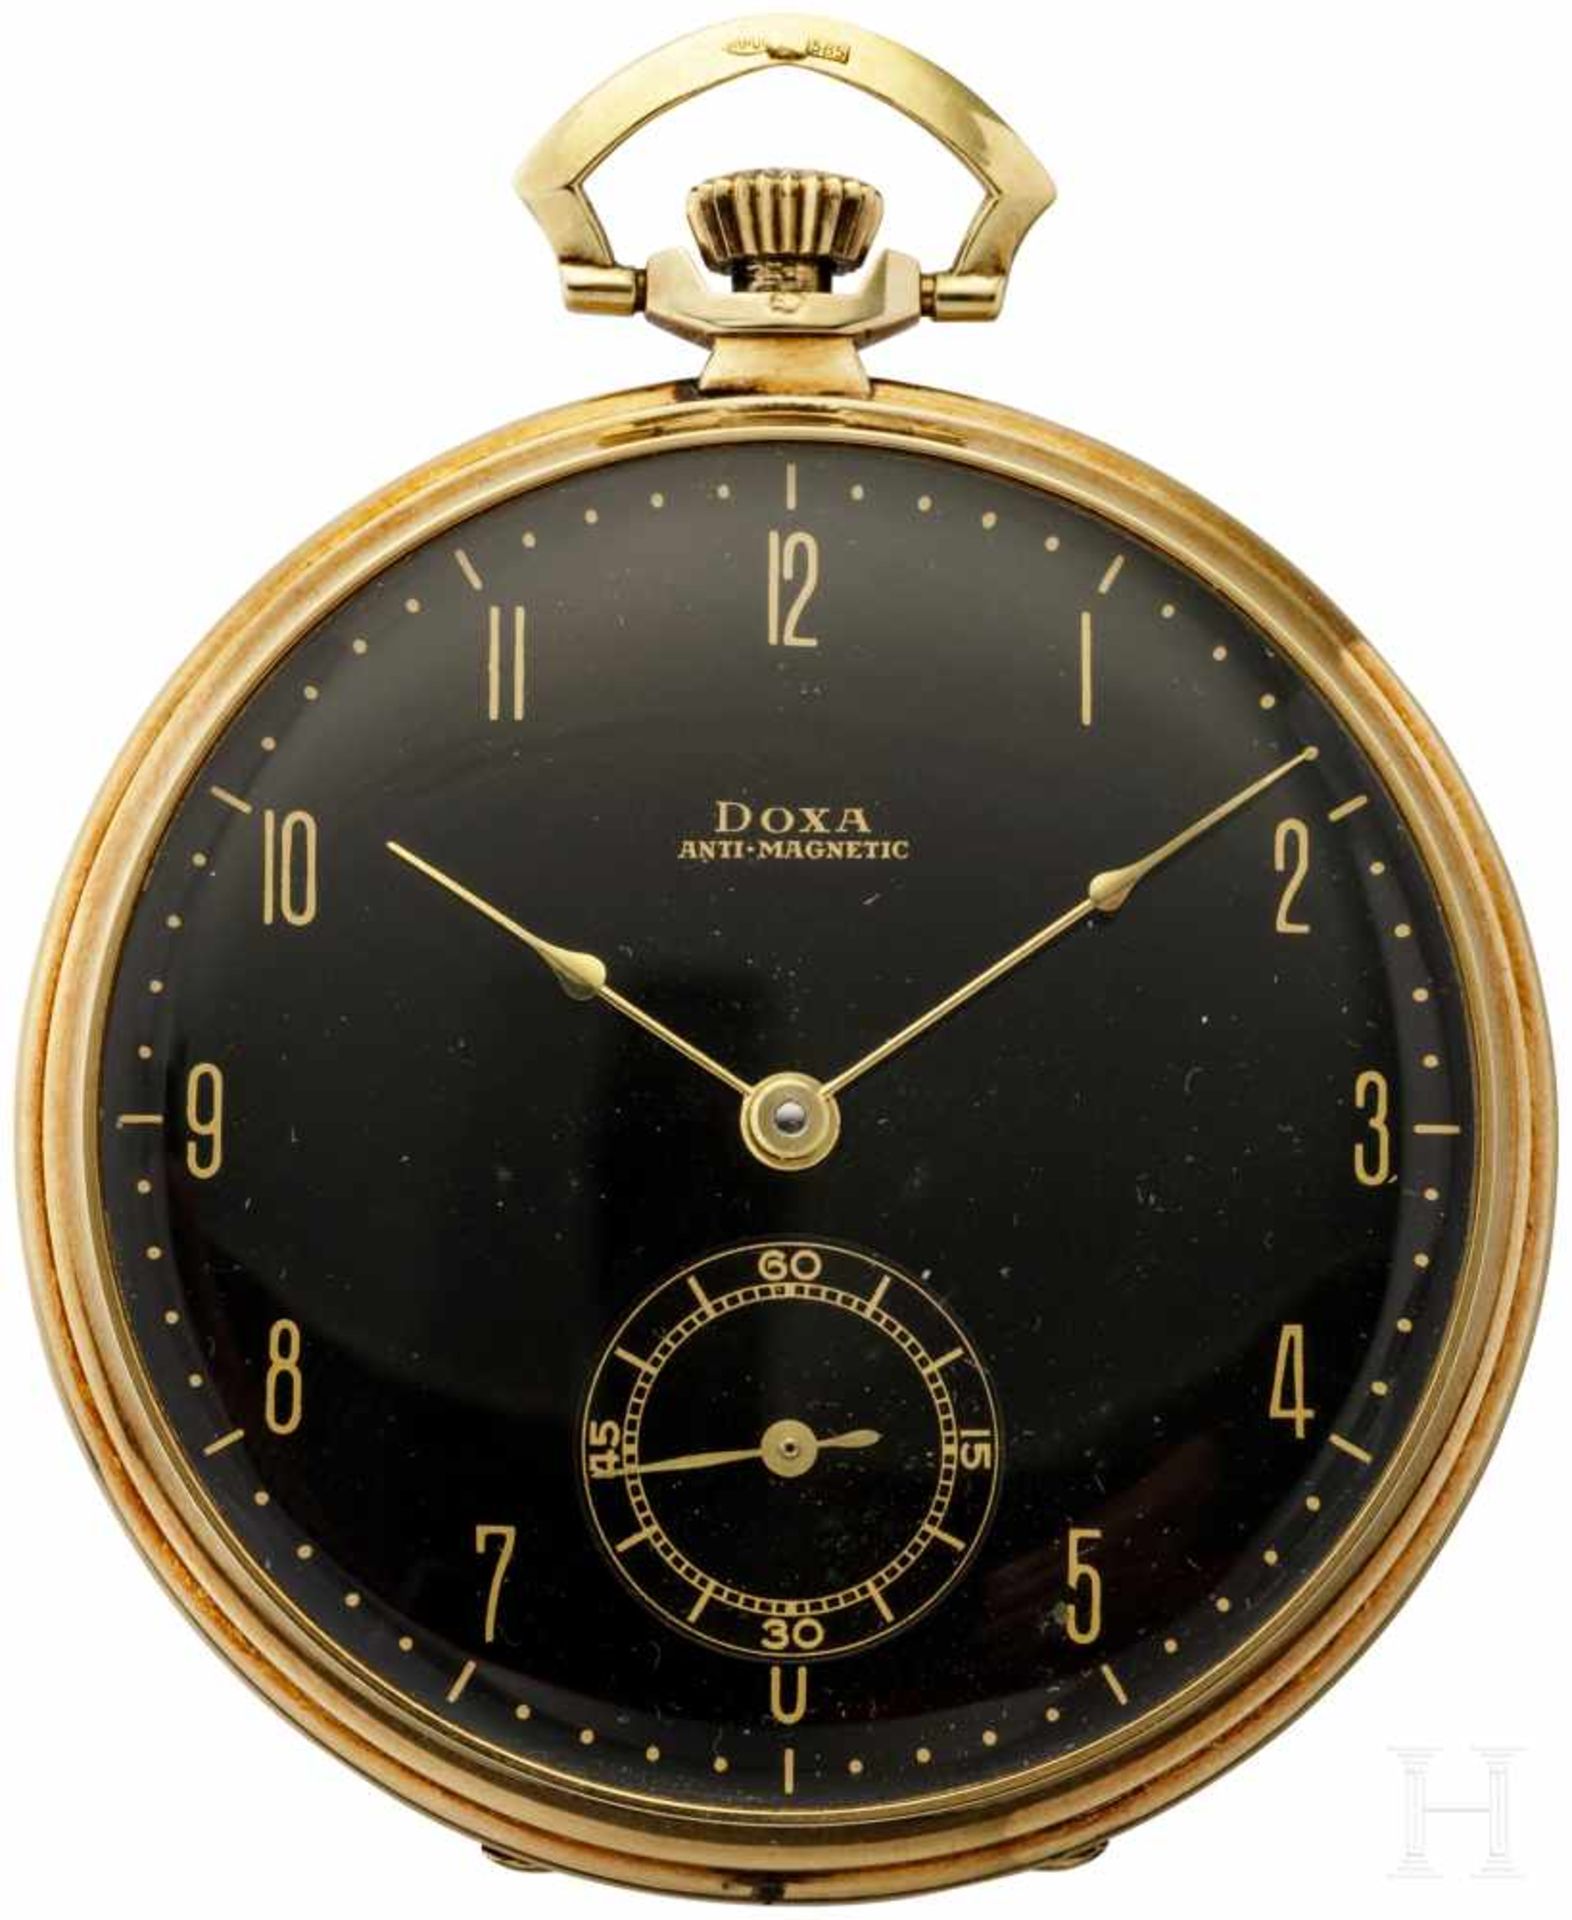 A golden pocket watch, model "Doxa"Black dial with golden indices and description "Doxa Anti-